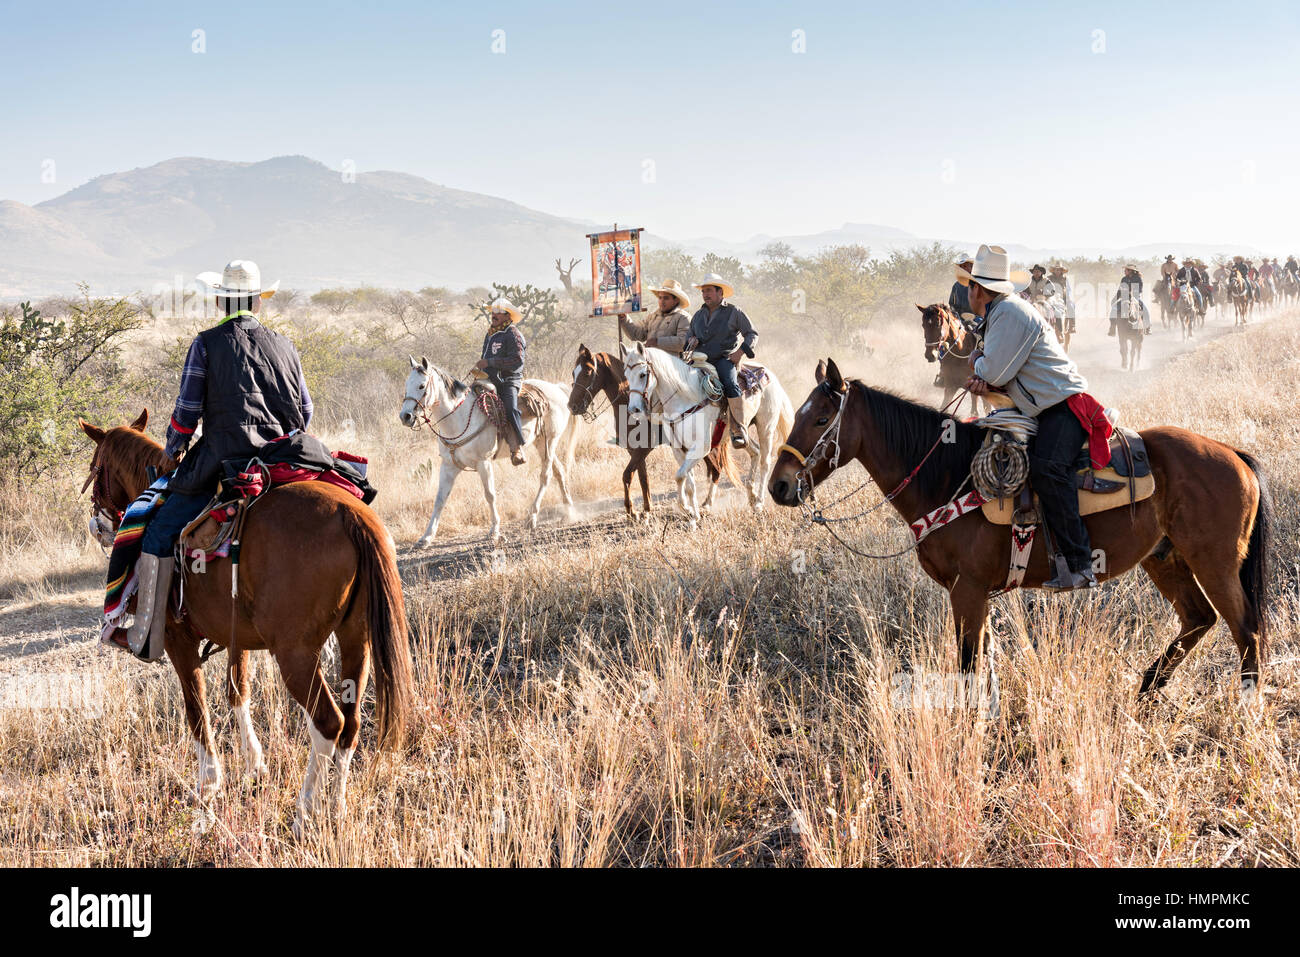 Volunteers watch as hundreds of Mexican cowboys ride past during the annual Cabalgata de Cristo Rey pilgrimage January 5, 2017 in La Trinidad, Guanajuato, Mexico. Thousands of Mexican cowboys and horse take part in the three-day ride to the mountaintop shrine of Cristo Rey stopping along the way at shrines and churches. Stock Photo